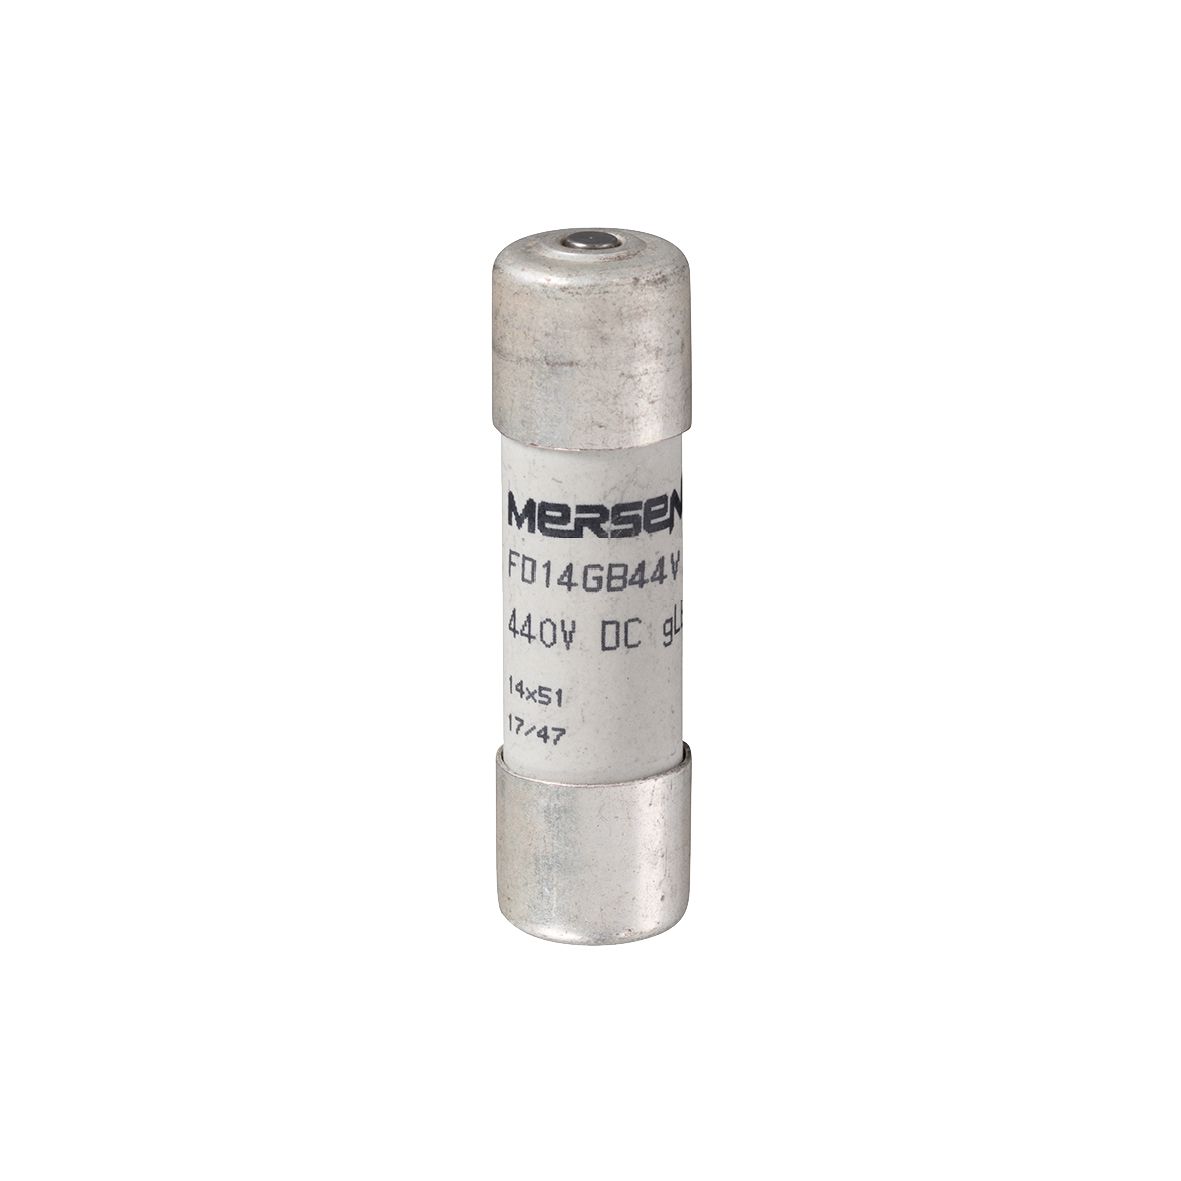 E075720 - Cylindrical fuse-link GRB 440VDC 14x51, 2A with striker